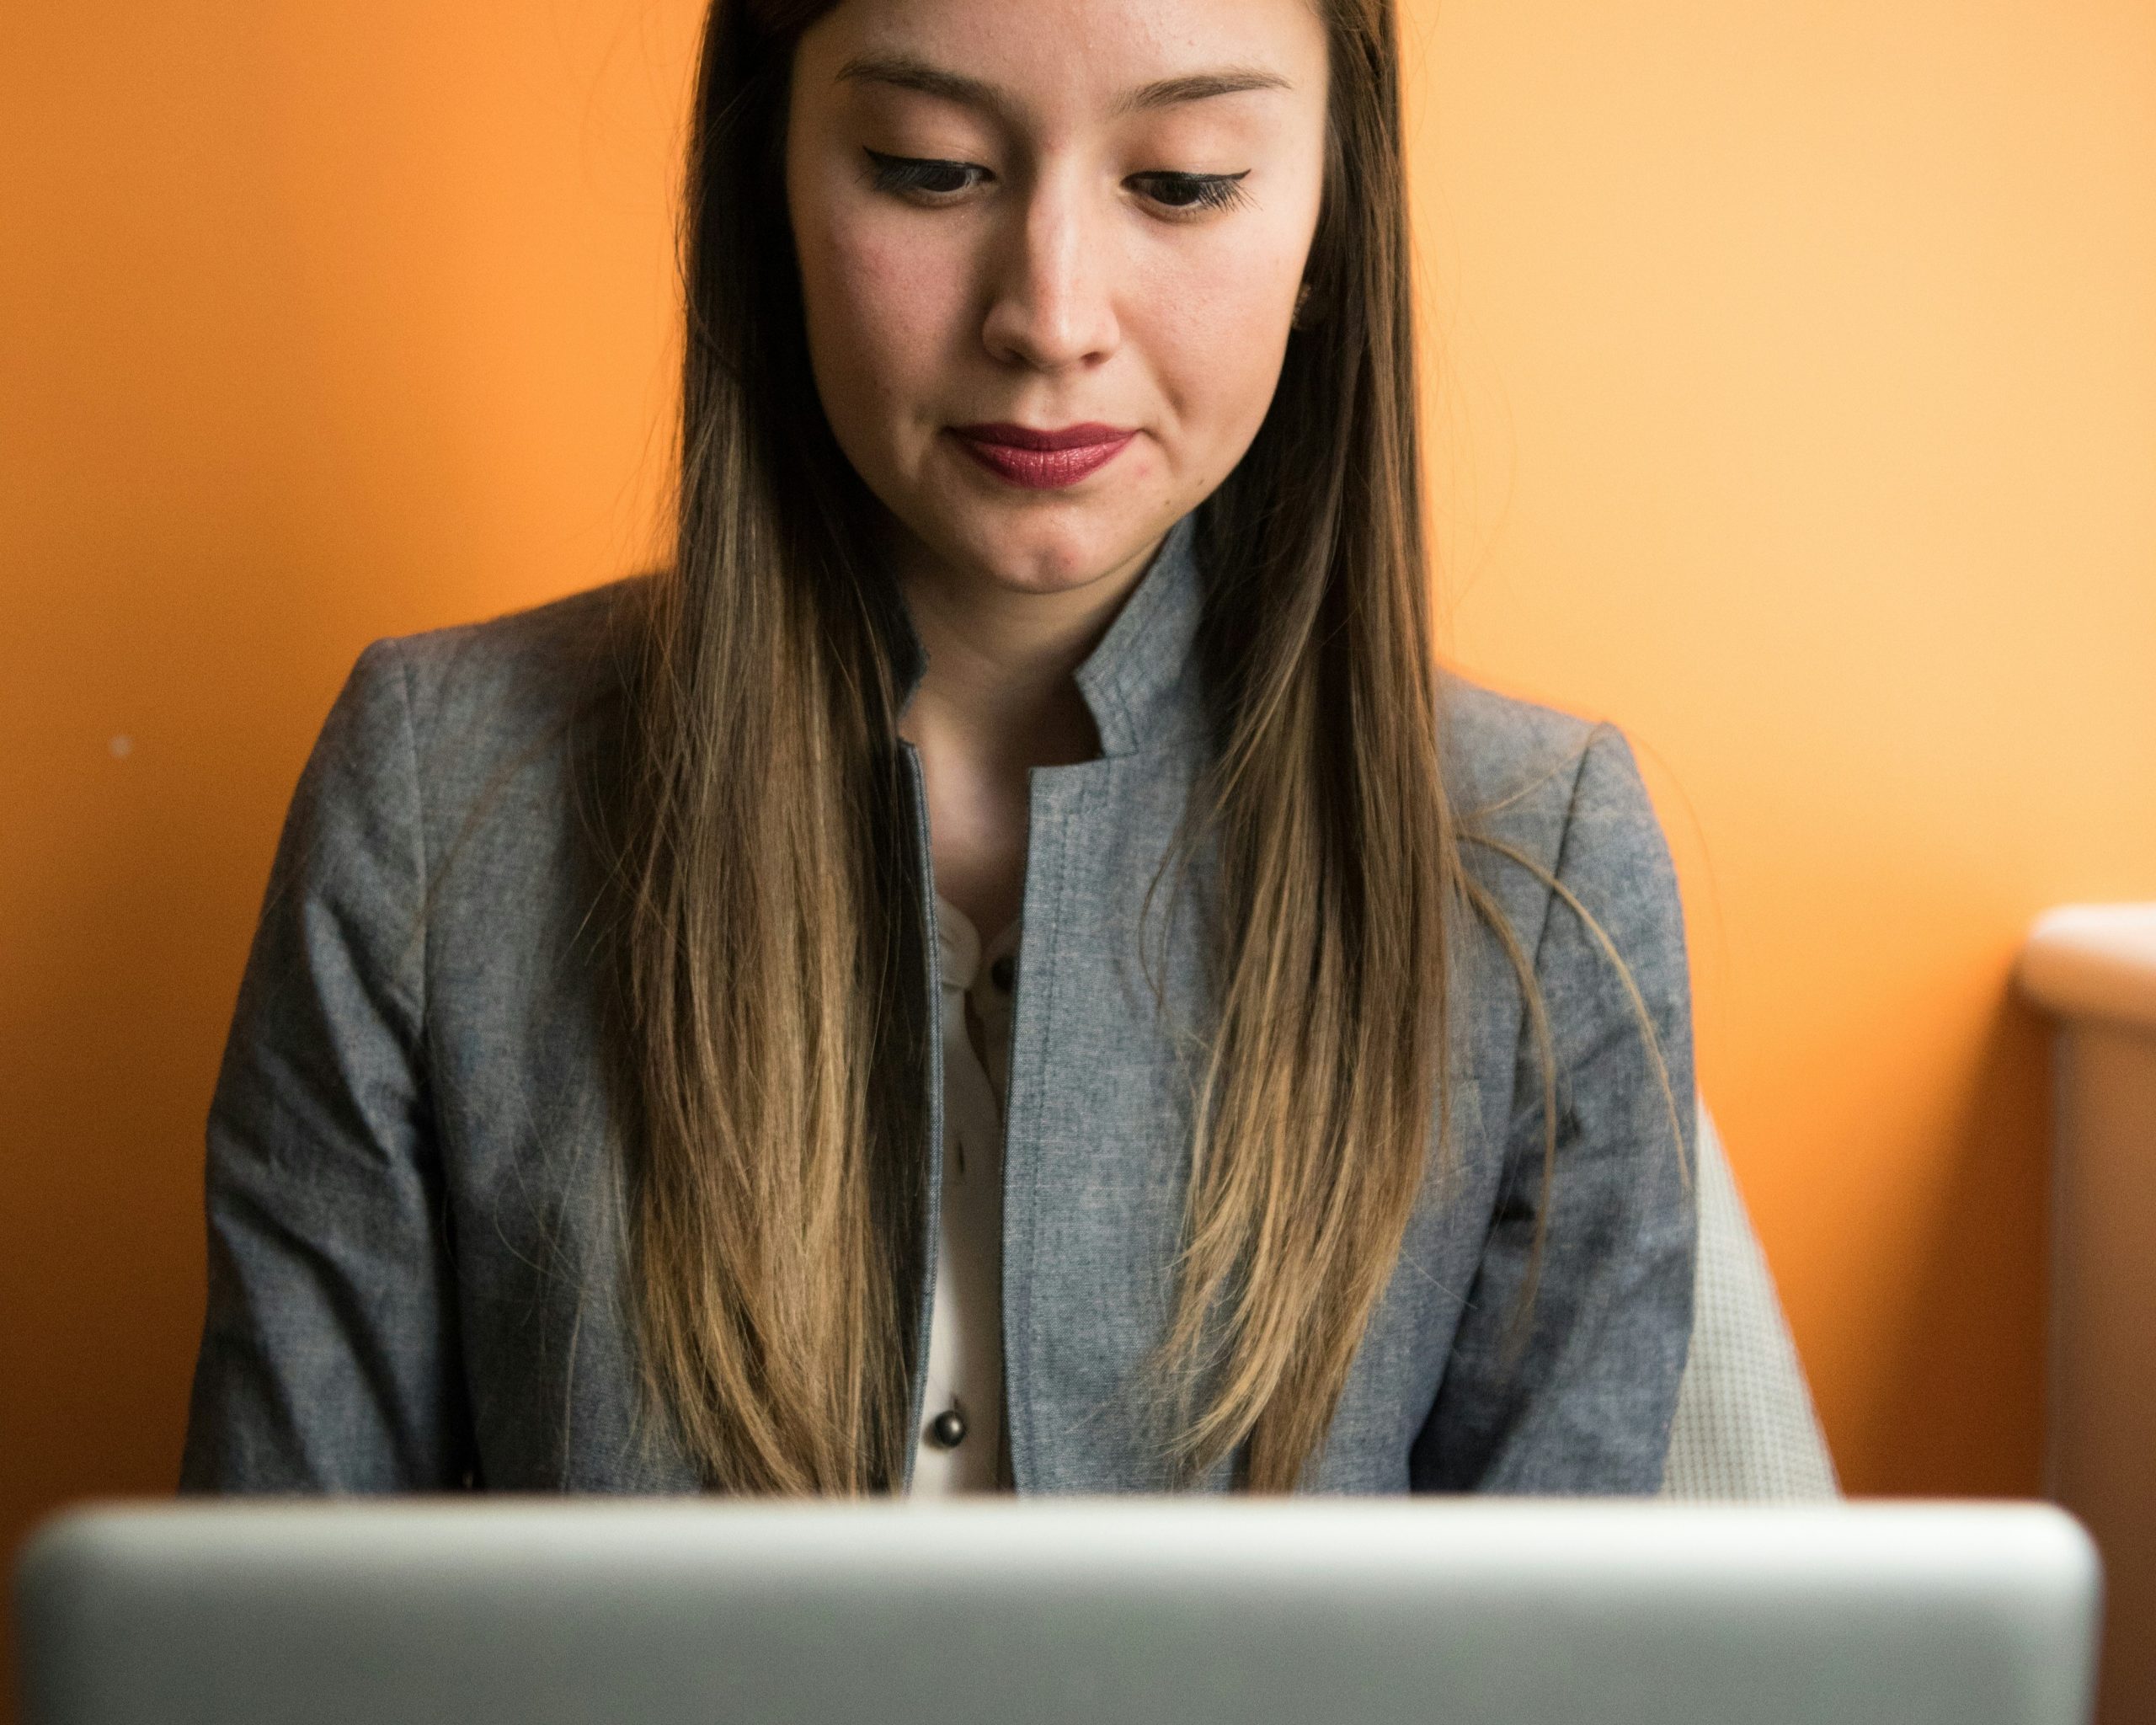 A person with long, straight hair is sitting in front of a laptop. Wearing a gray blazer and a light-colored shirt, they appear focused on the screen, possibly contemplating new business ideas for women. The background is a solid orange color.